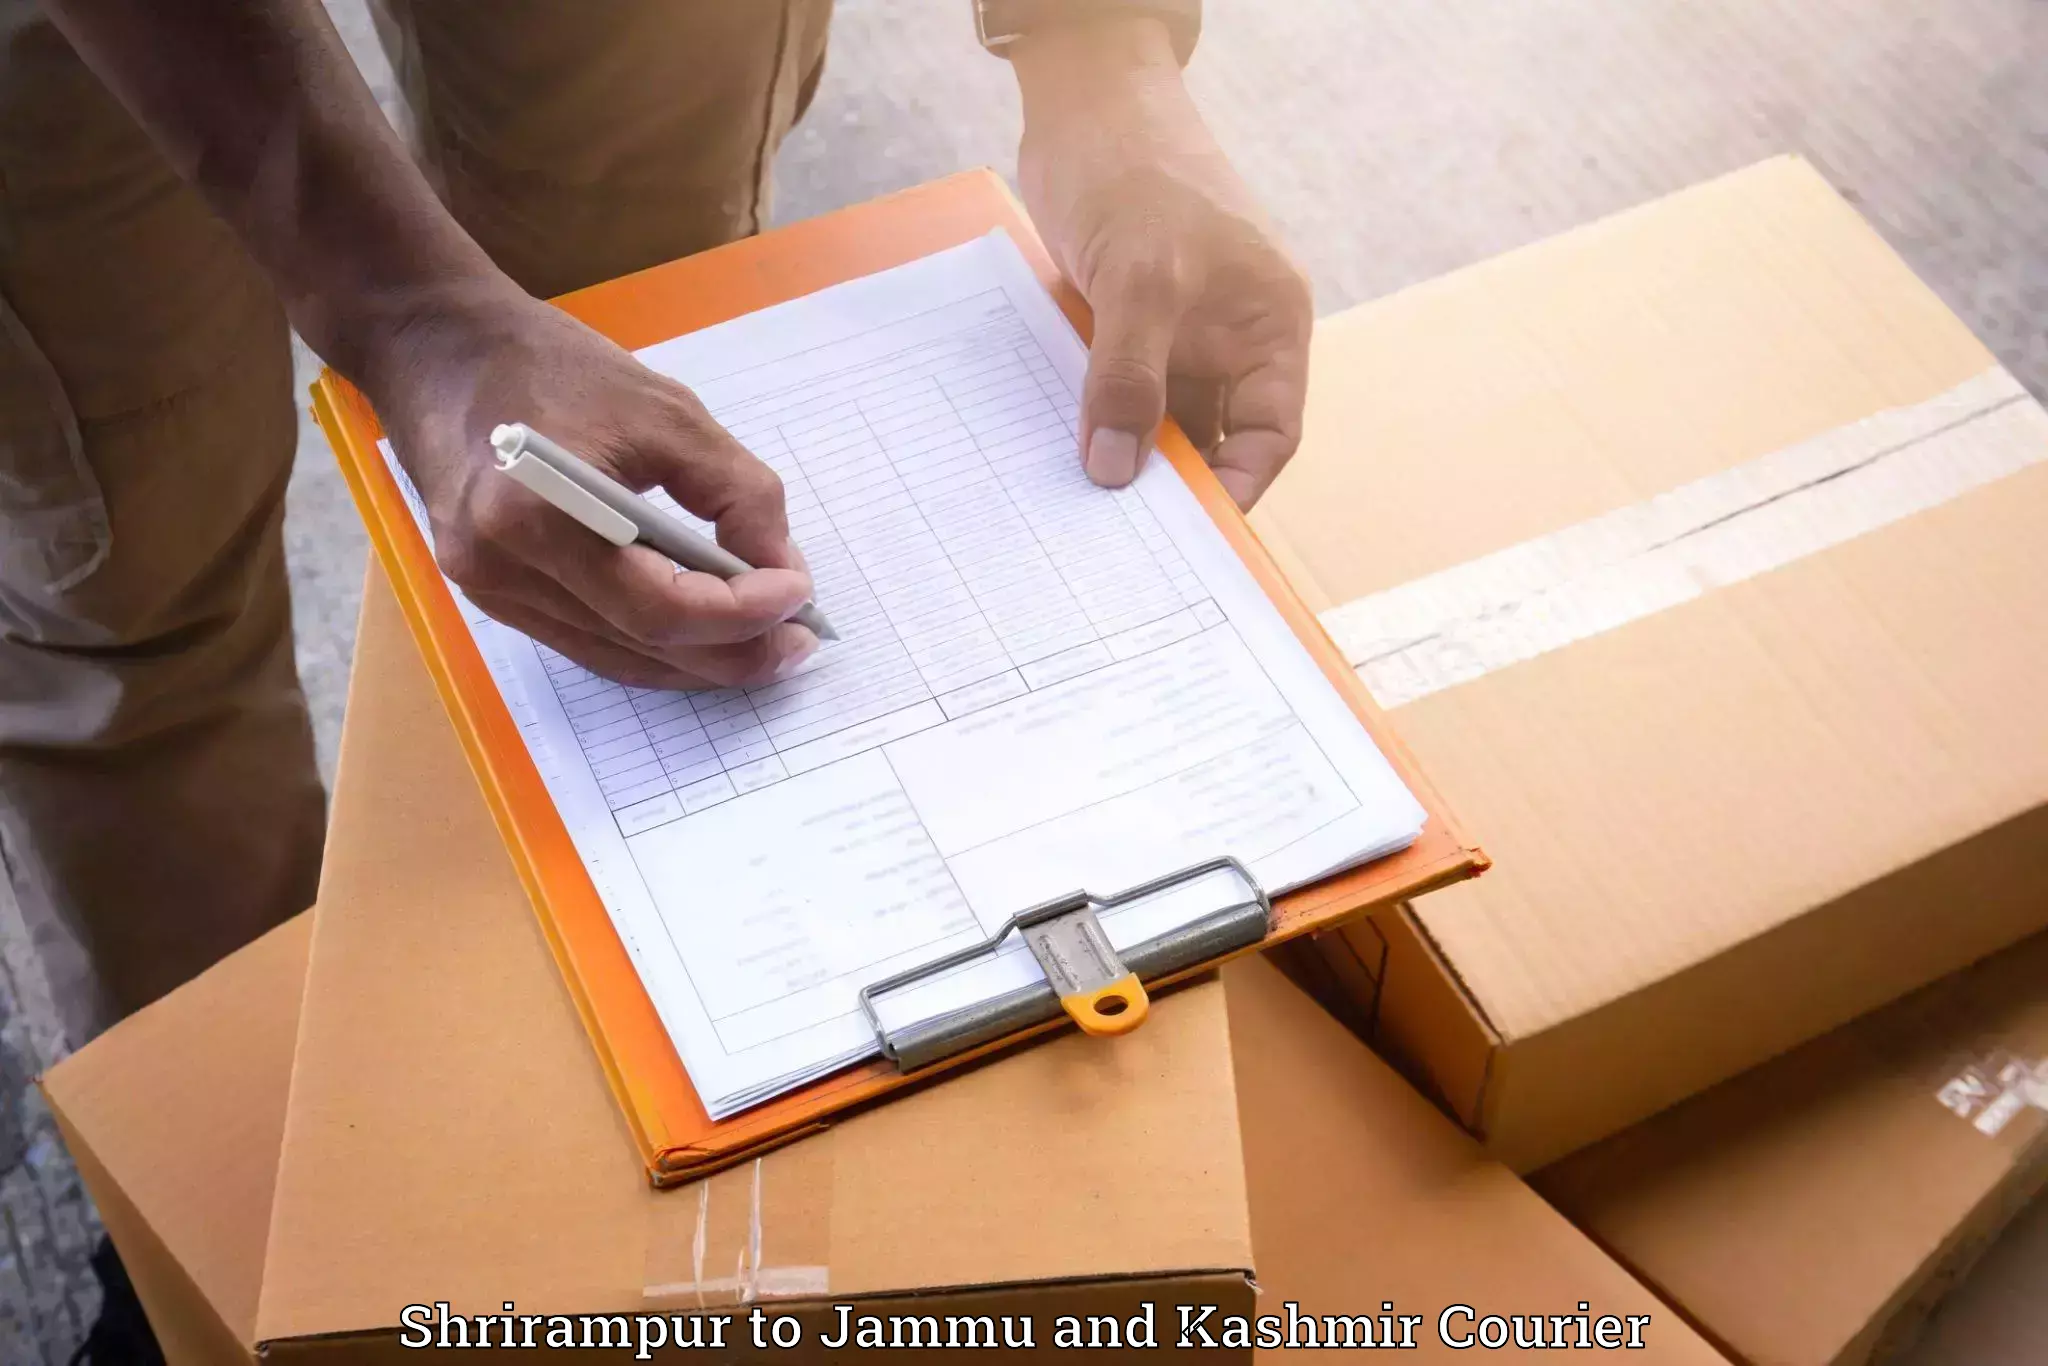 Moving and storage services Shrirampur to Jammu and Kashmir